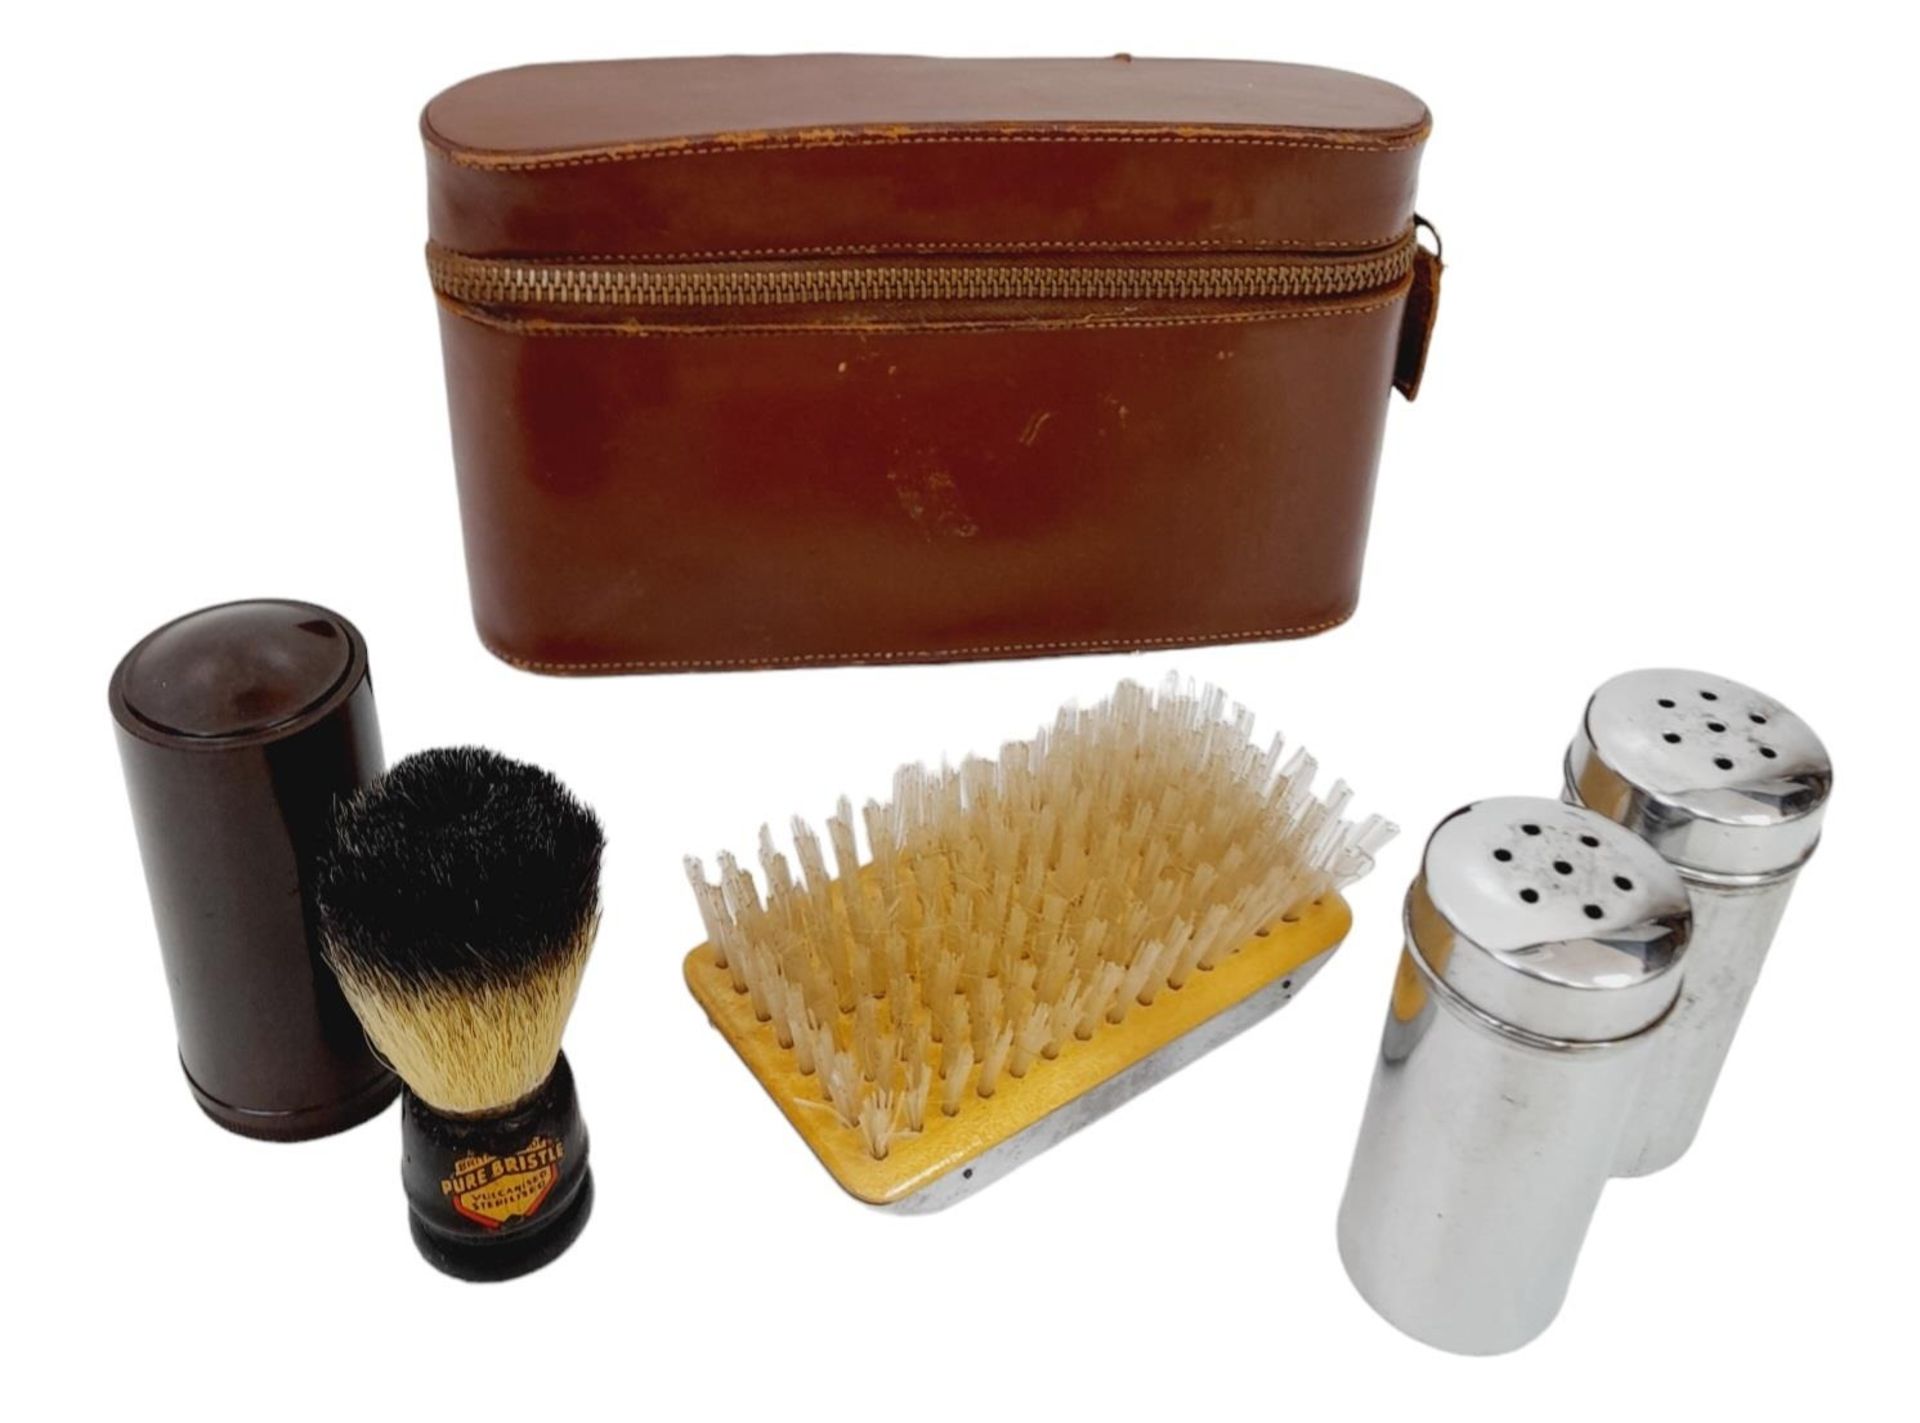 WW2 Escape and Evasion Shaving Set. In the original box it was sent to the Prisoner of War Camp. The